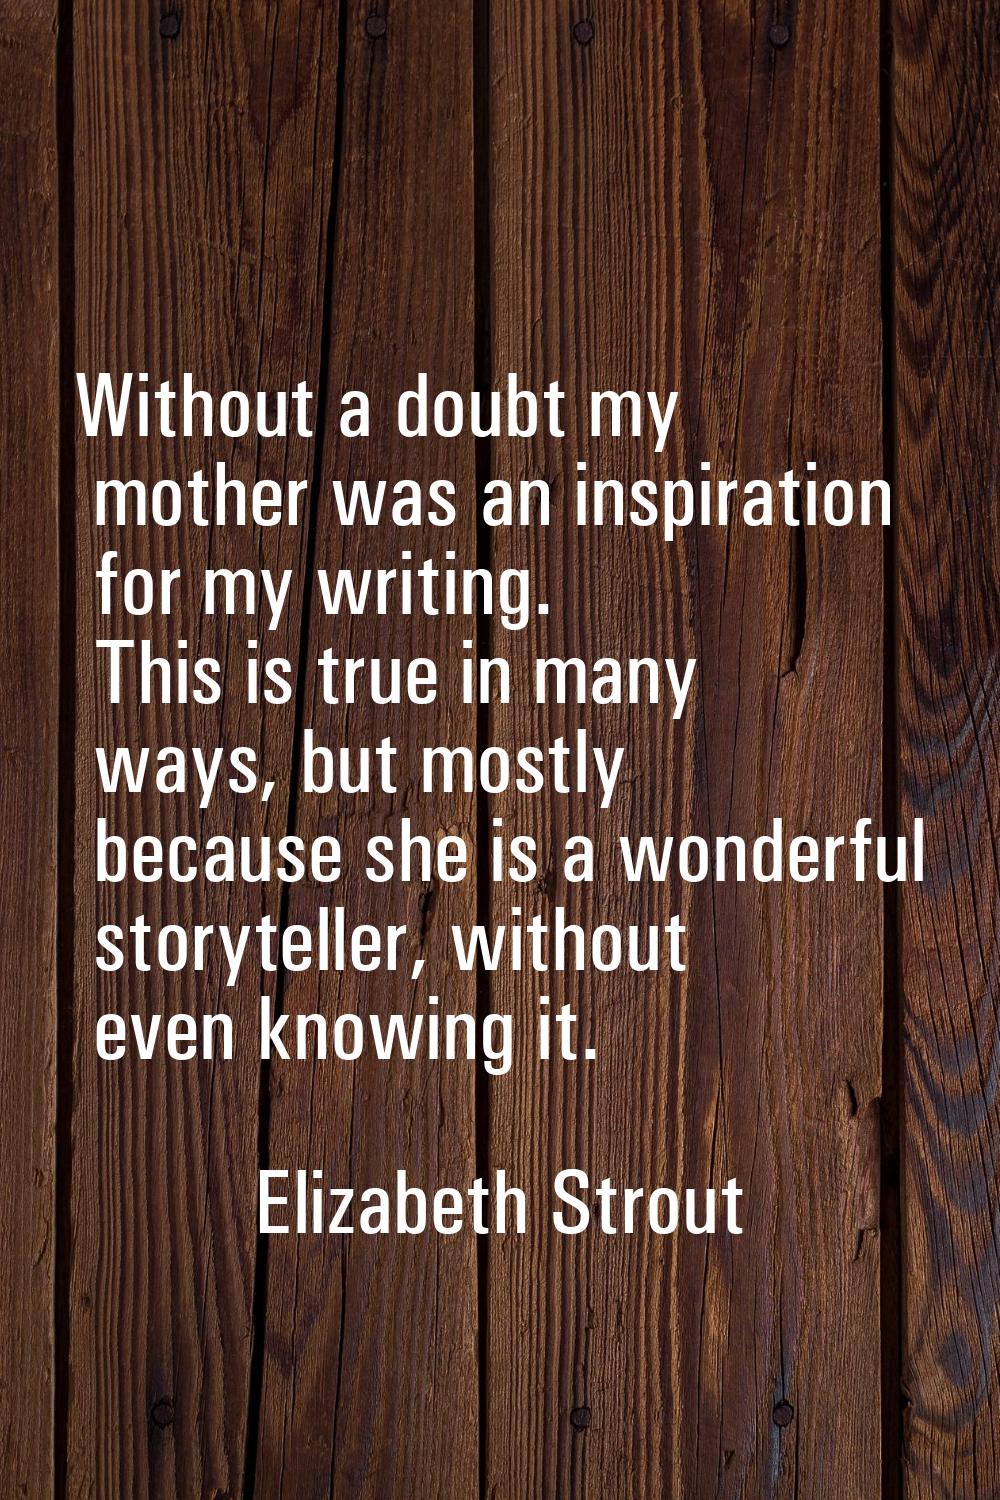 Without a doubt my mother was an inspiration for my writing. This is true in many ways, but mostly 